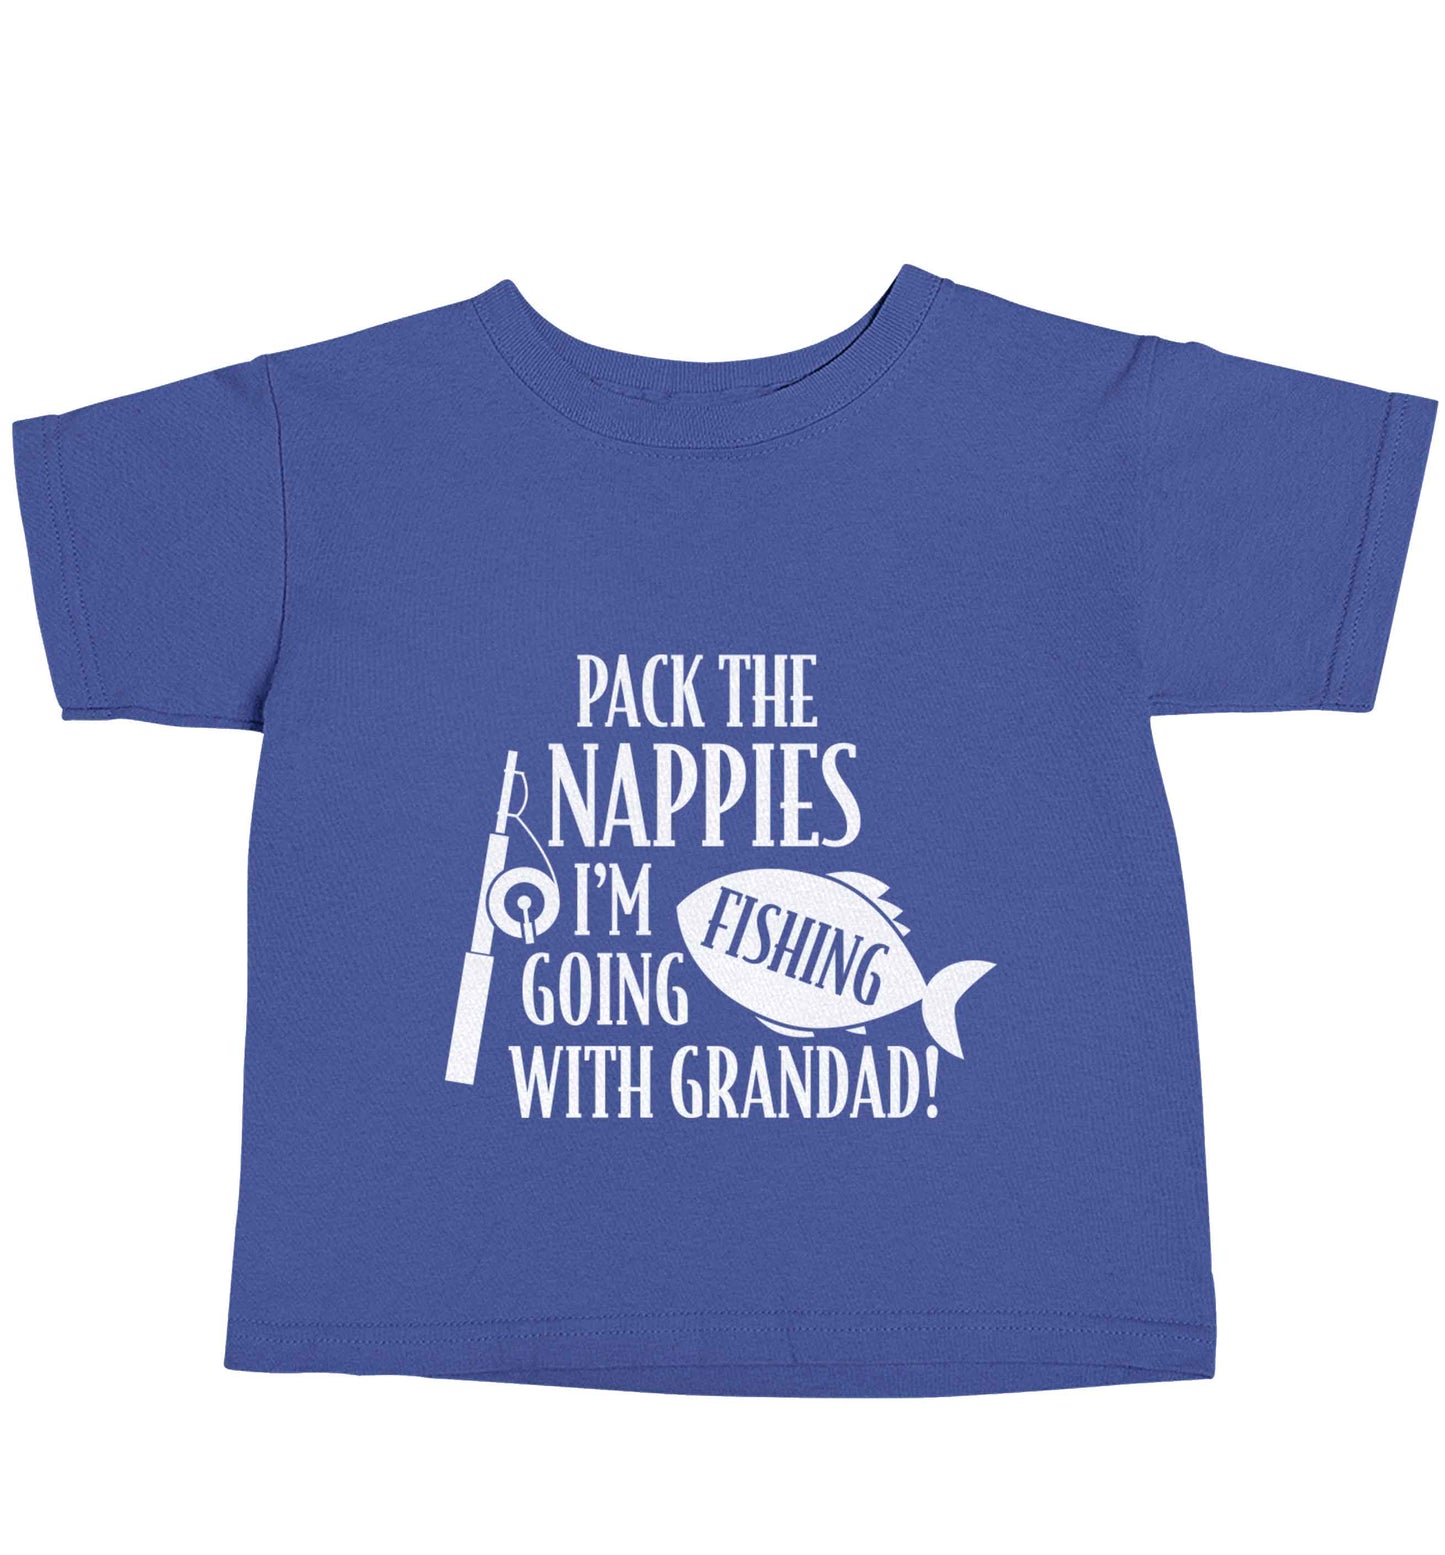 Pack the nappies I'm going fishing with Grandad blue baby toddler Tshirt 2 Years